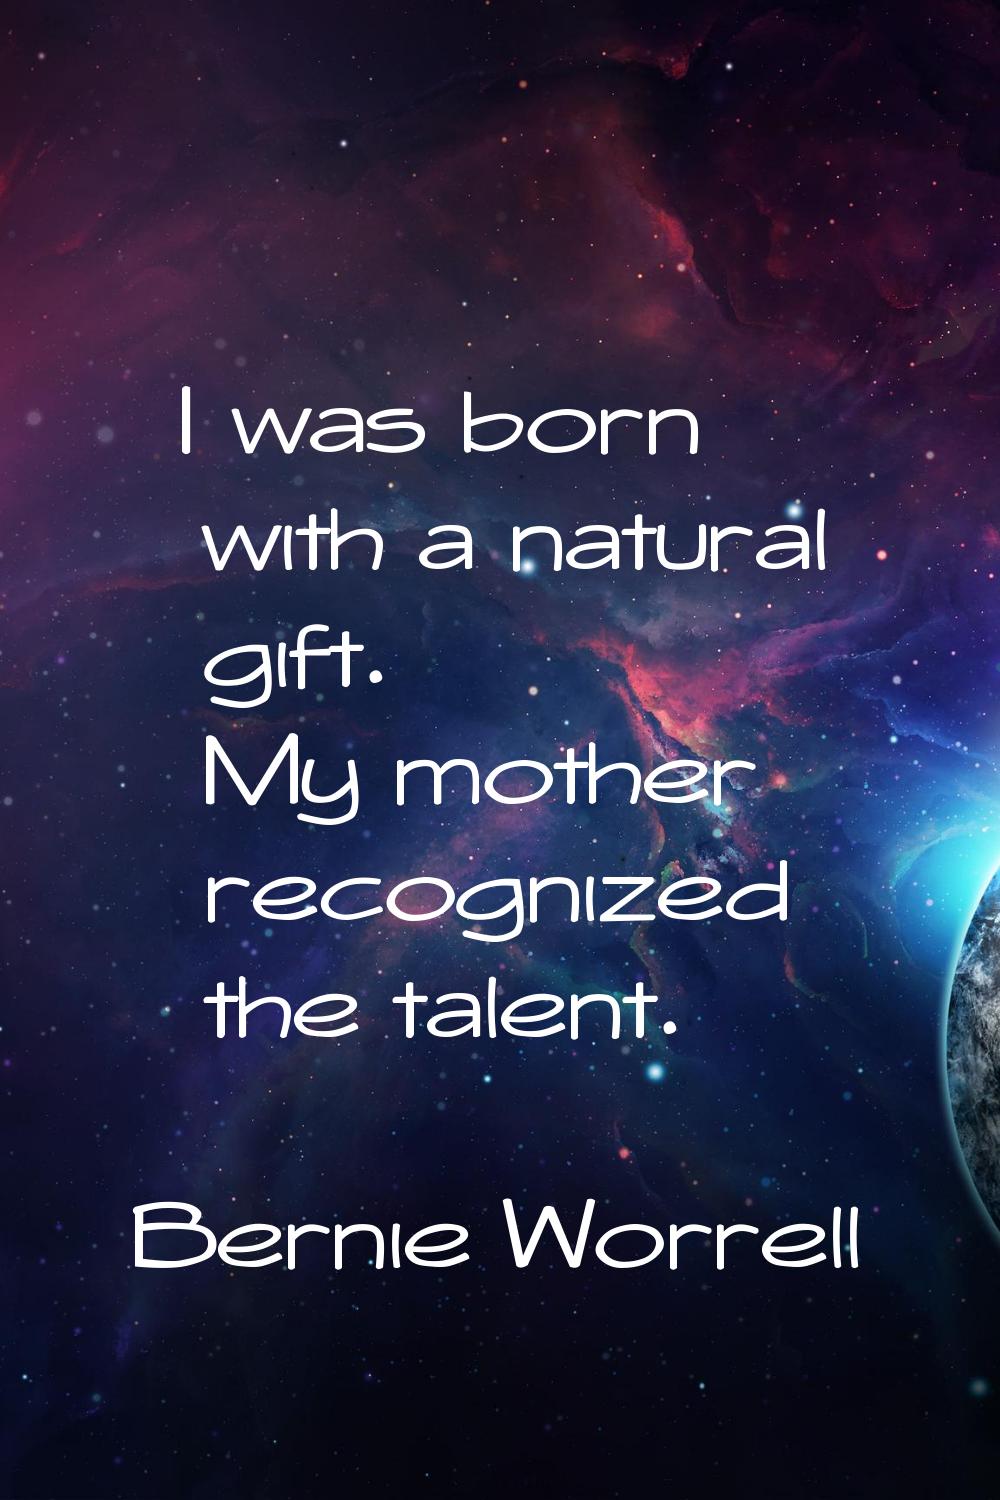 I was born with a natural gift. My mother recognized the talent.